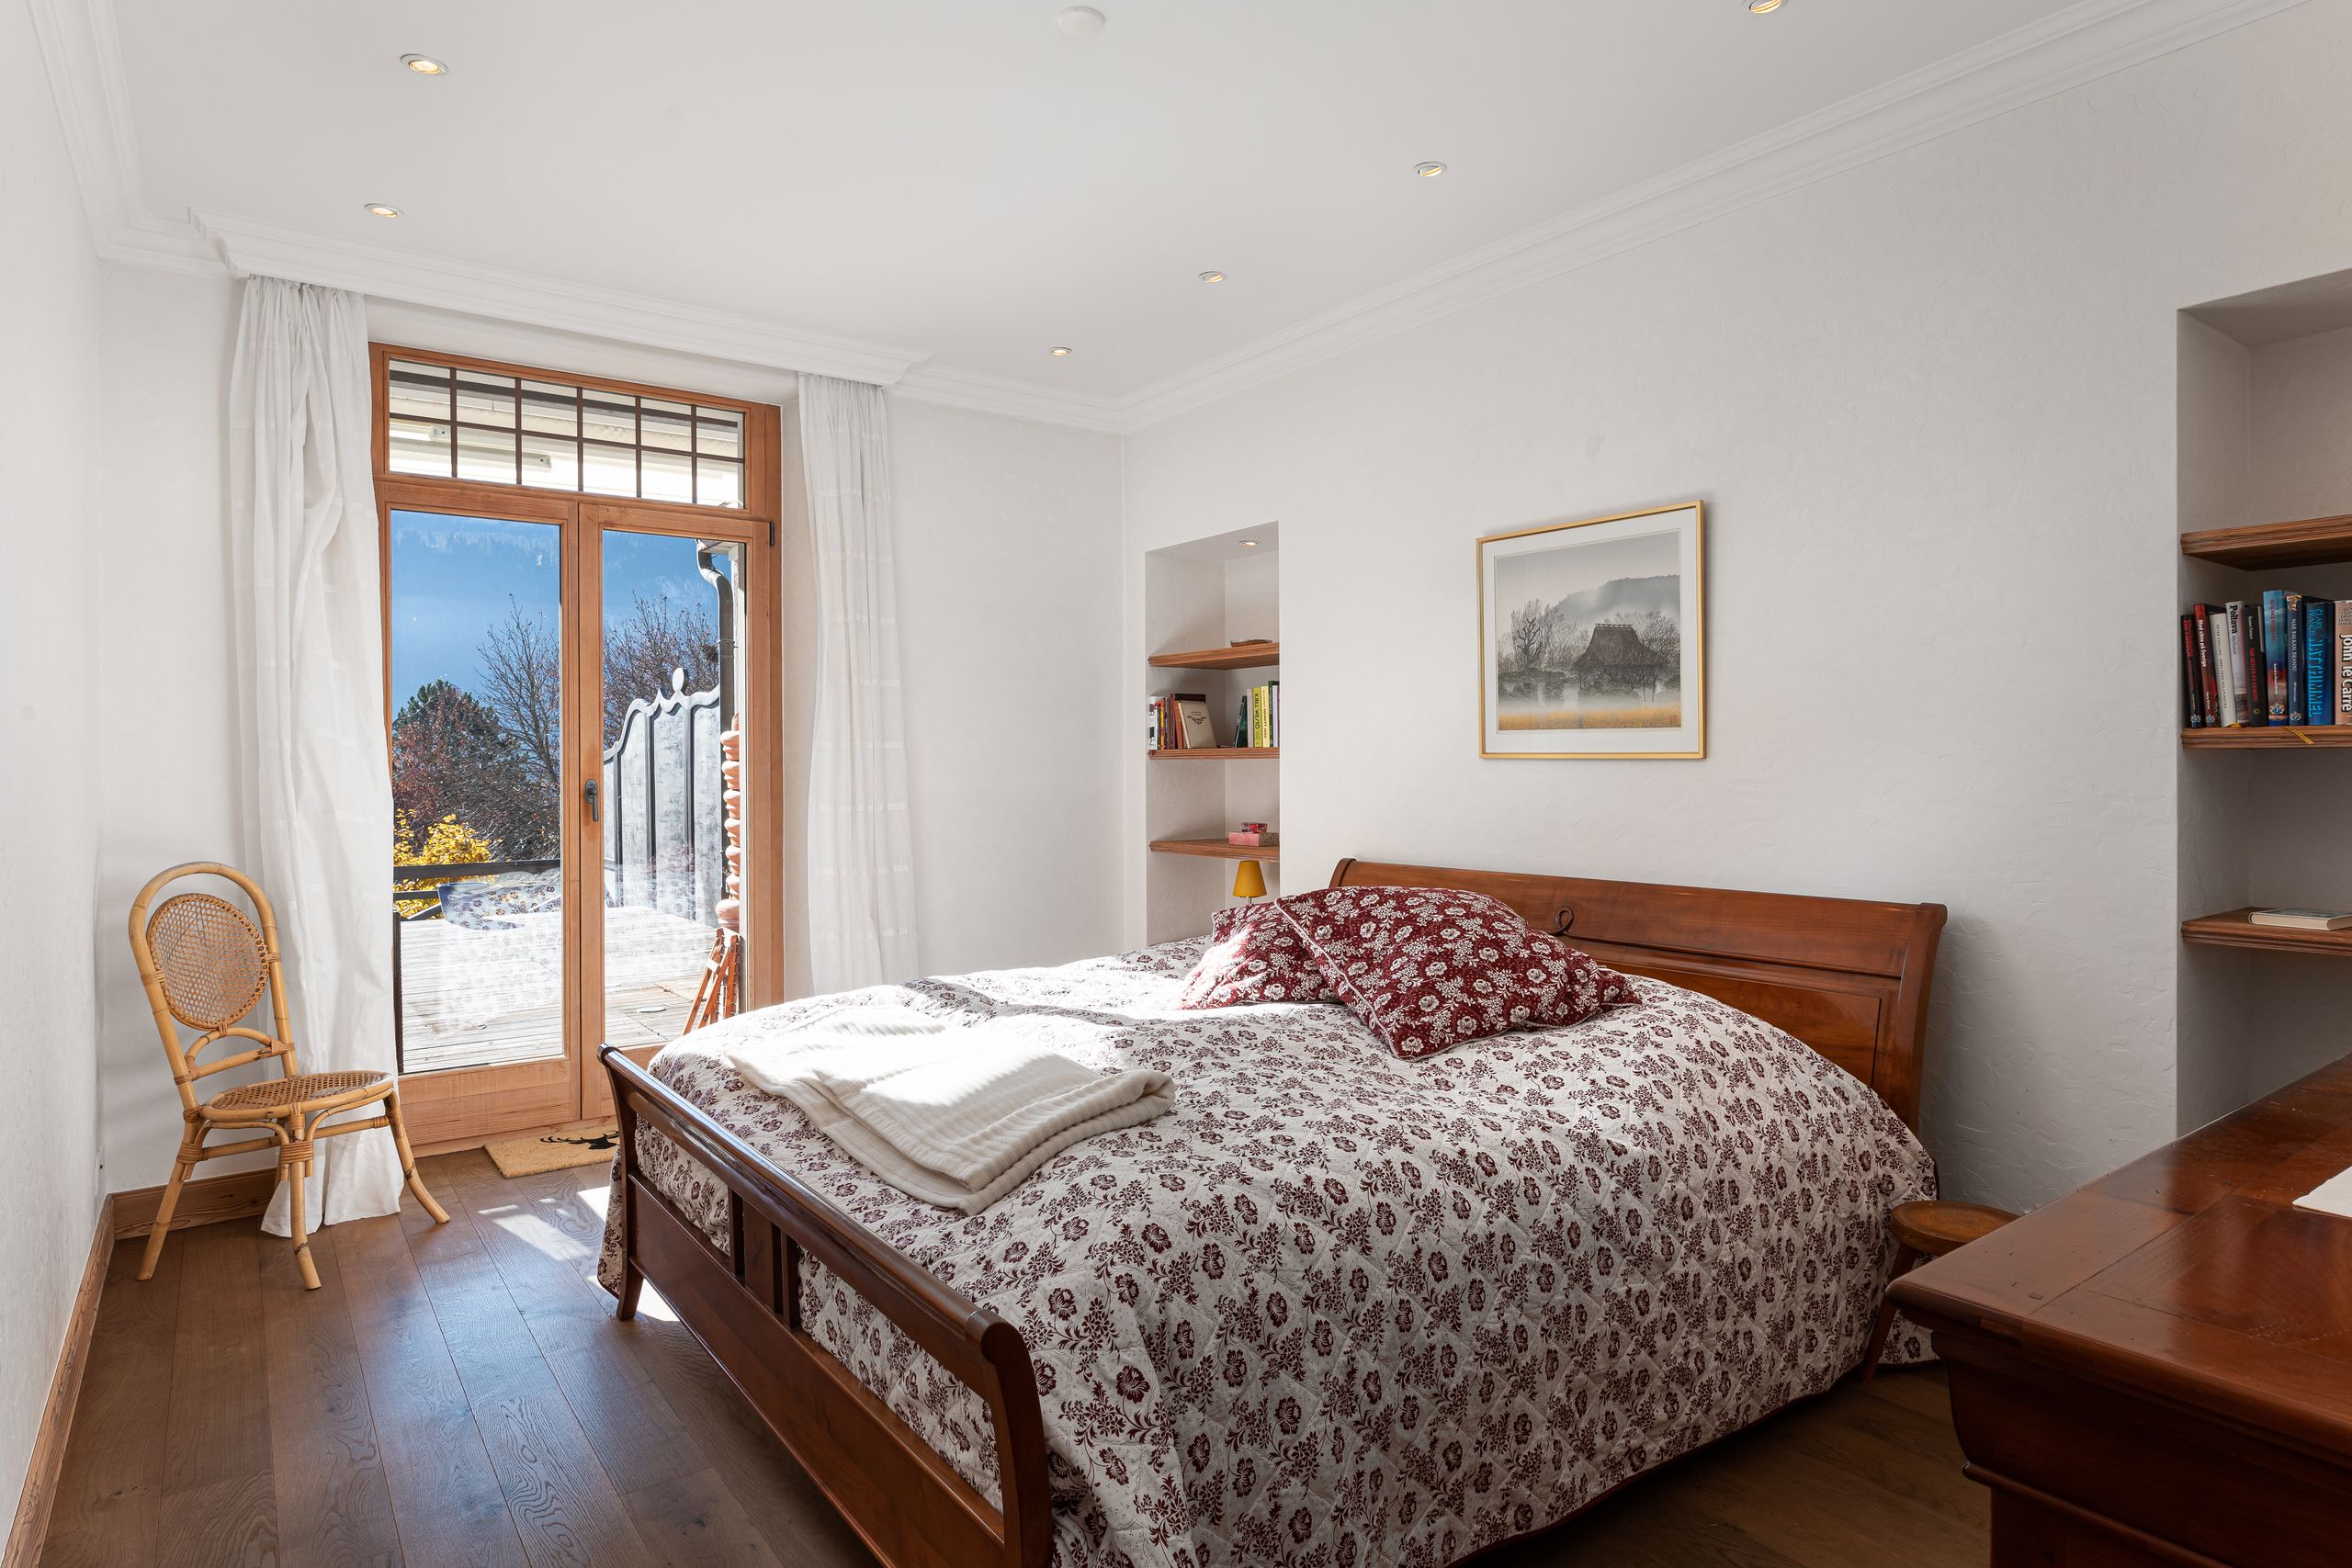 Master bedroom with direct access to the terrace